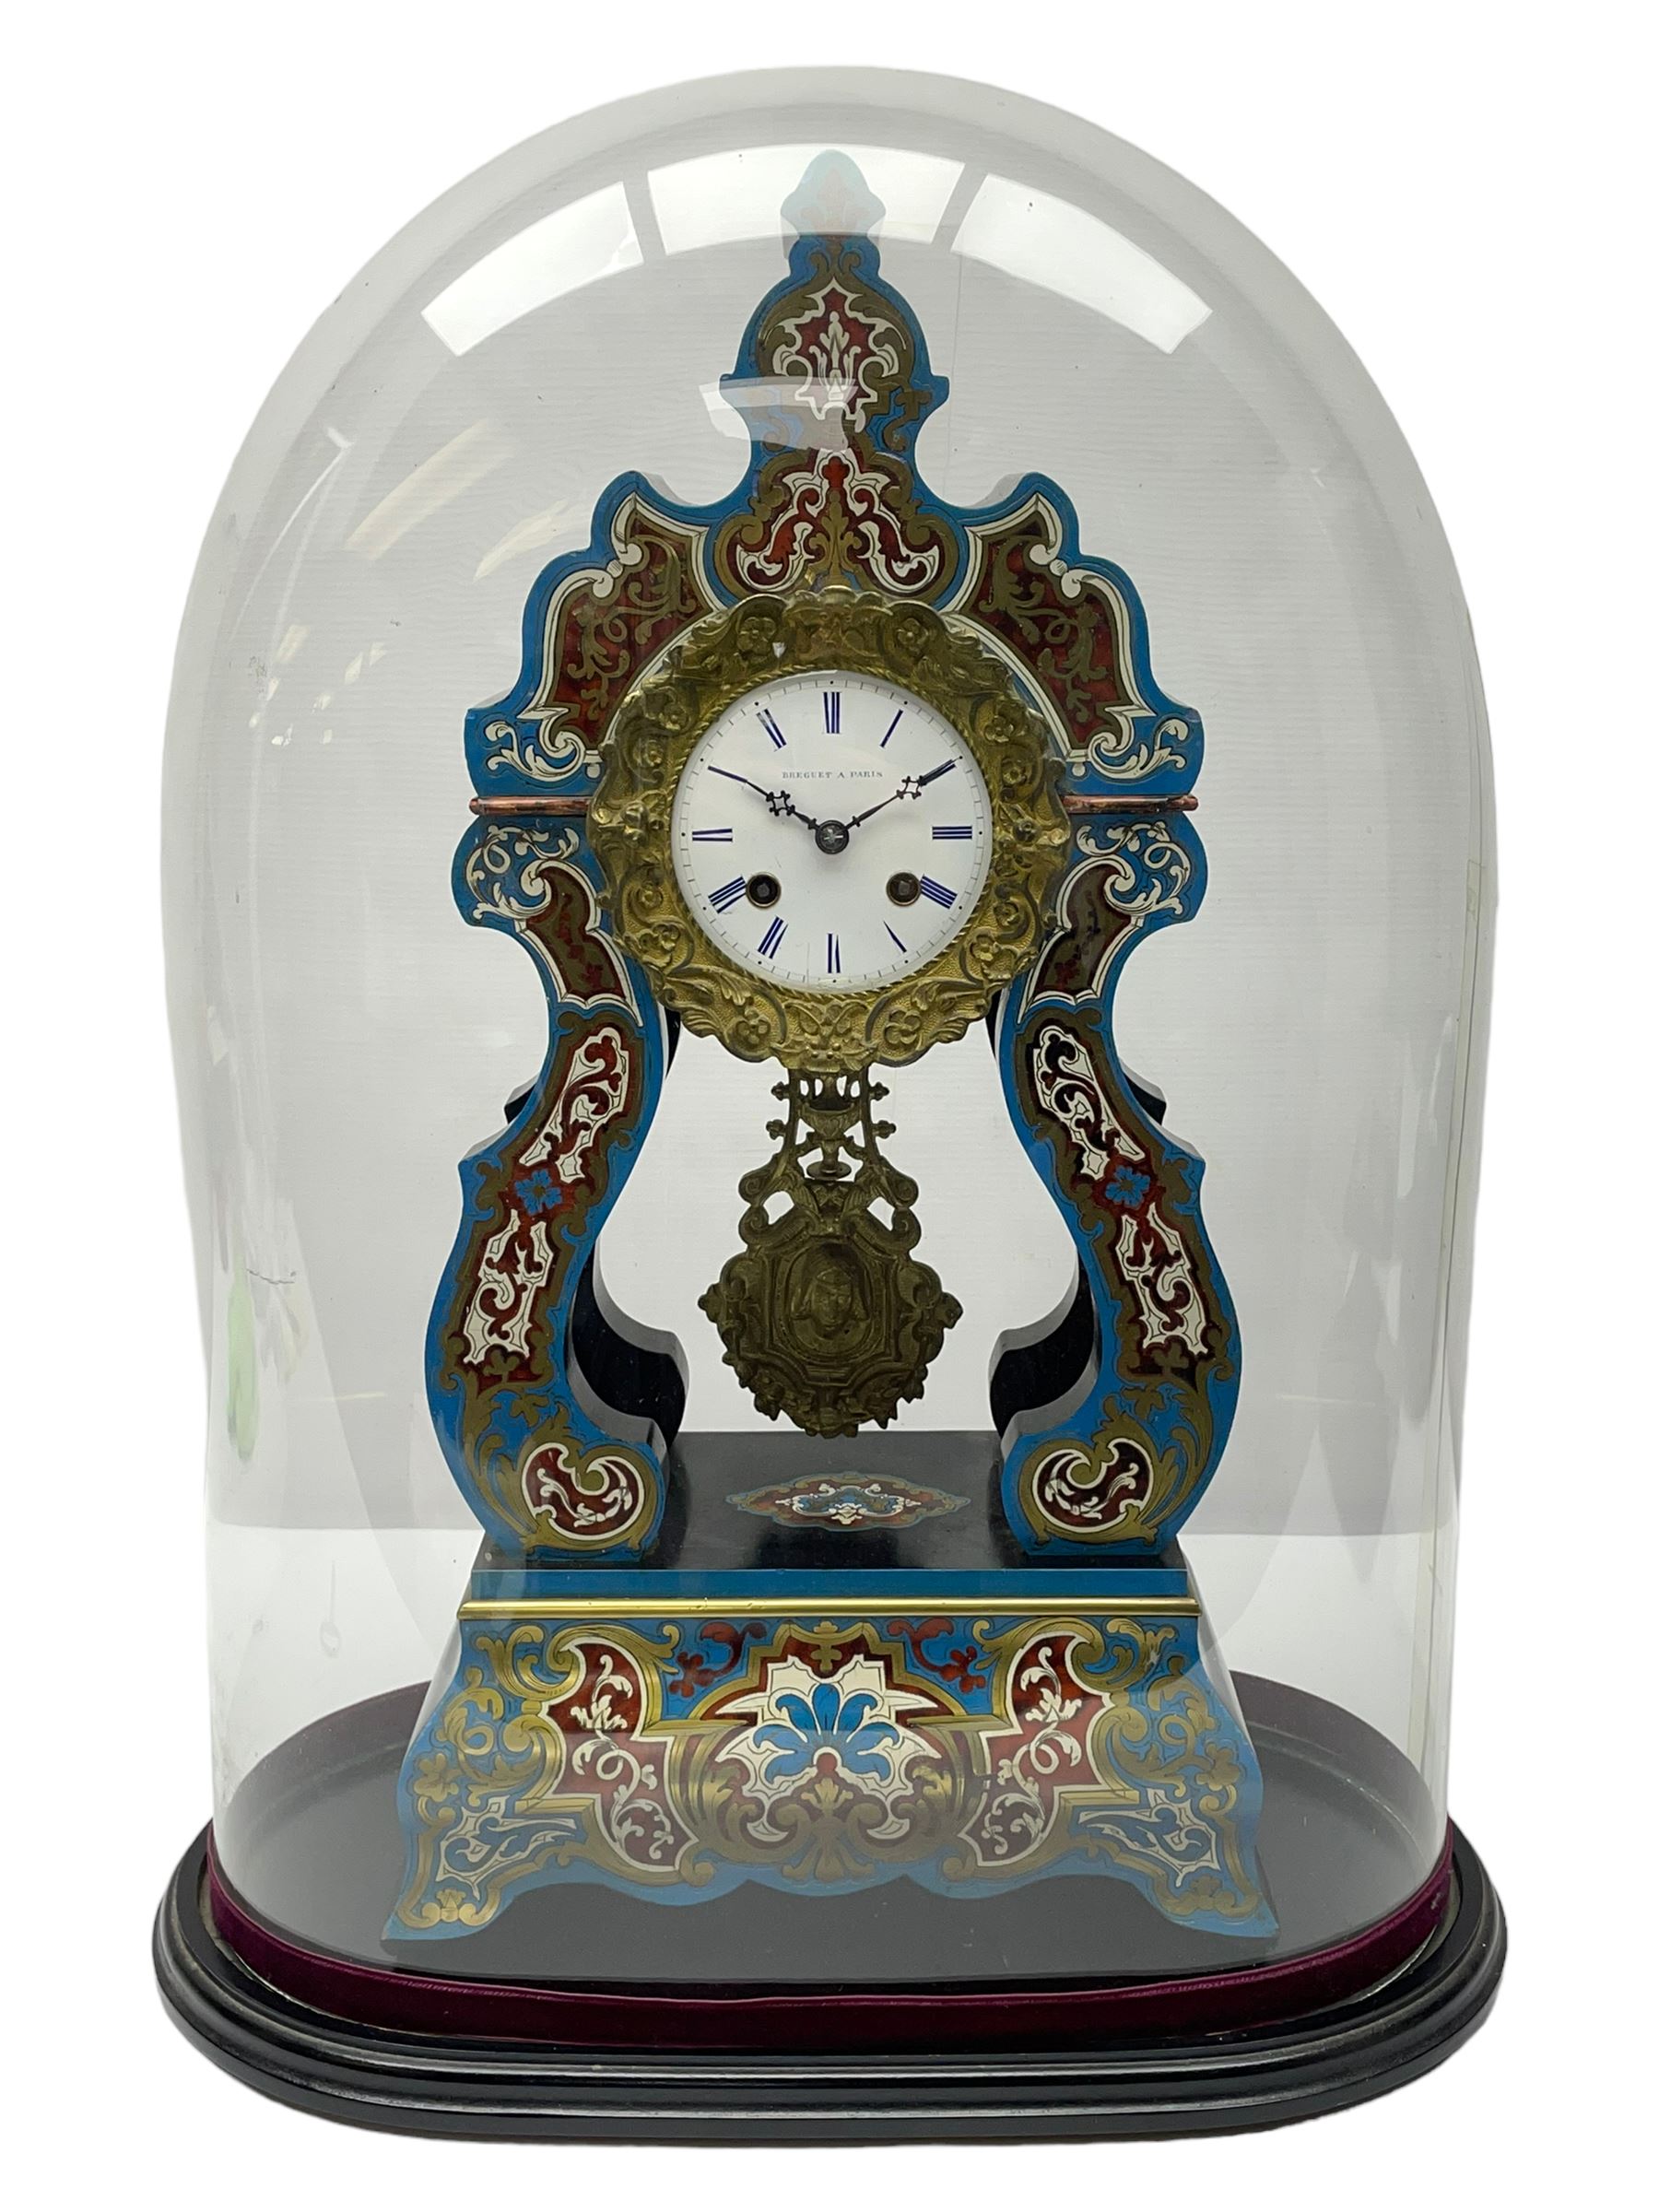 Breguet A Paris - Mid-19th century 8-day French portico clock - Image 5 of 8